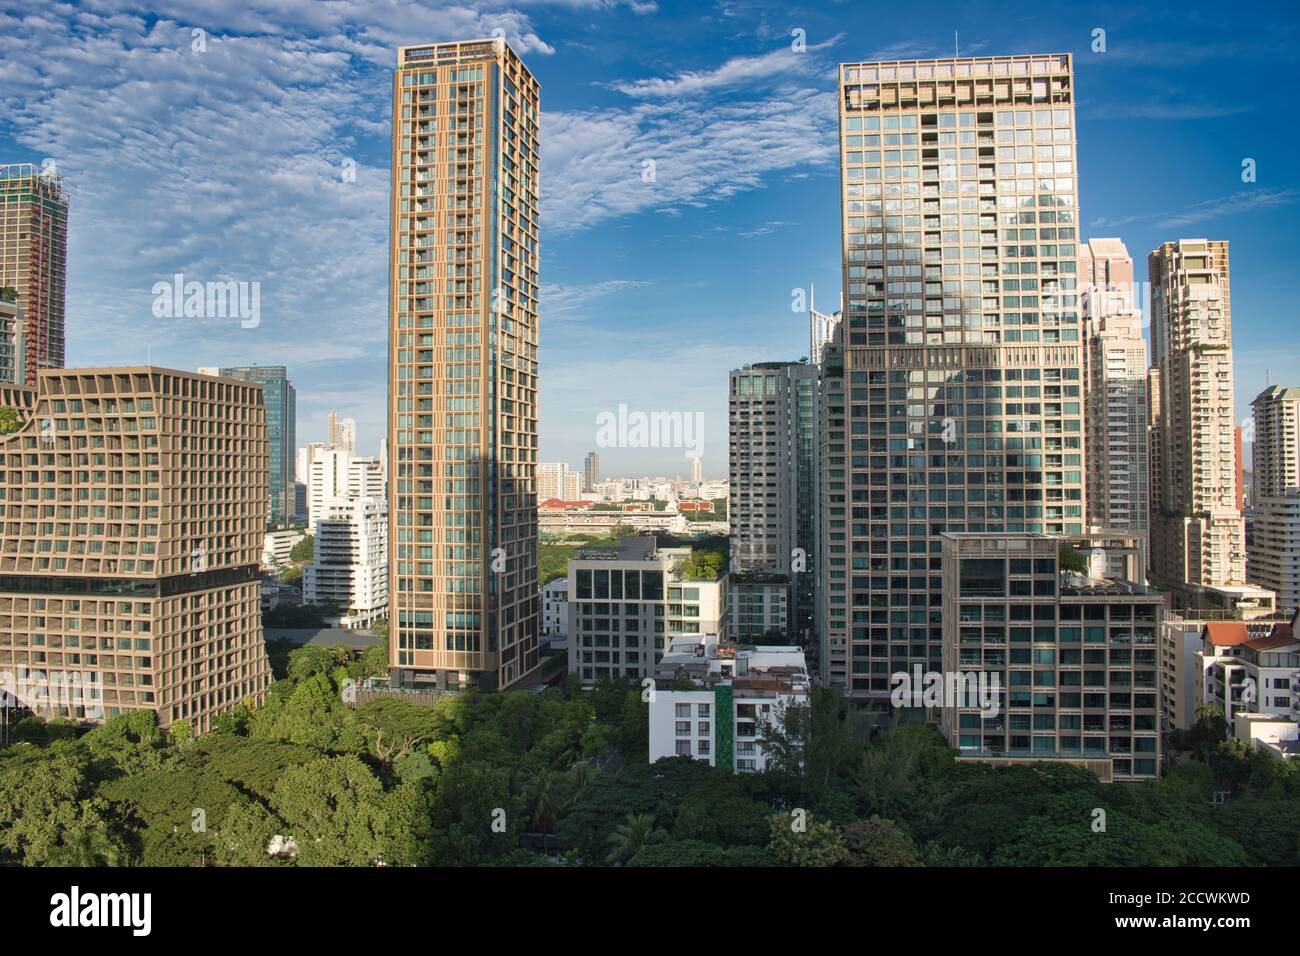 The stunning skyline of Bangkok the capital of Thailand with all its skyscrapers by day! Stock Photo